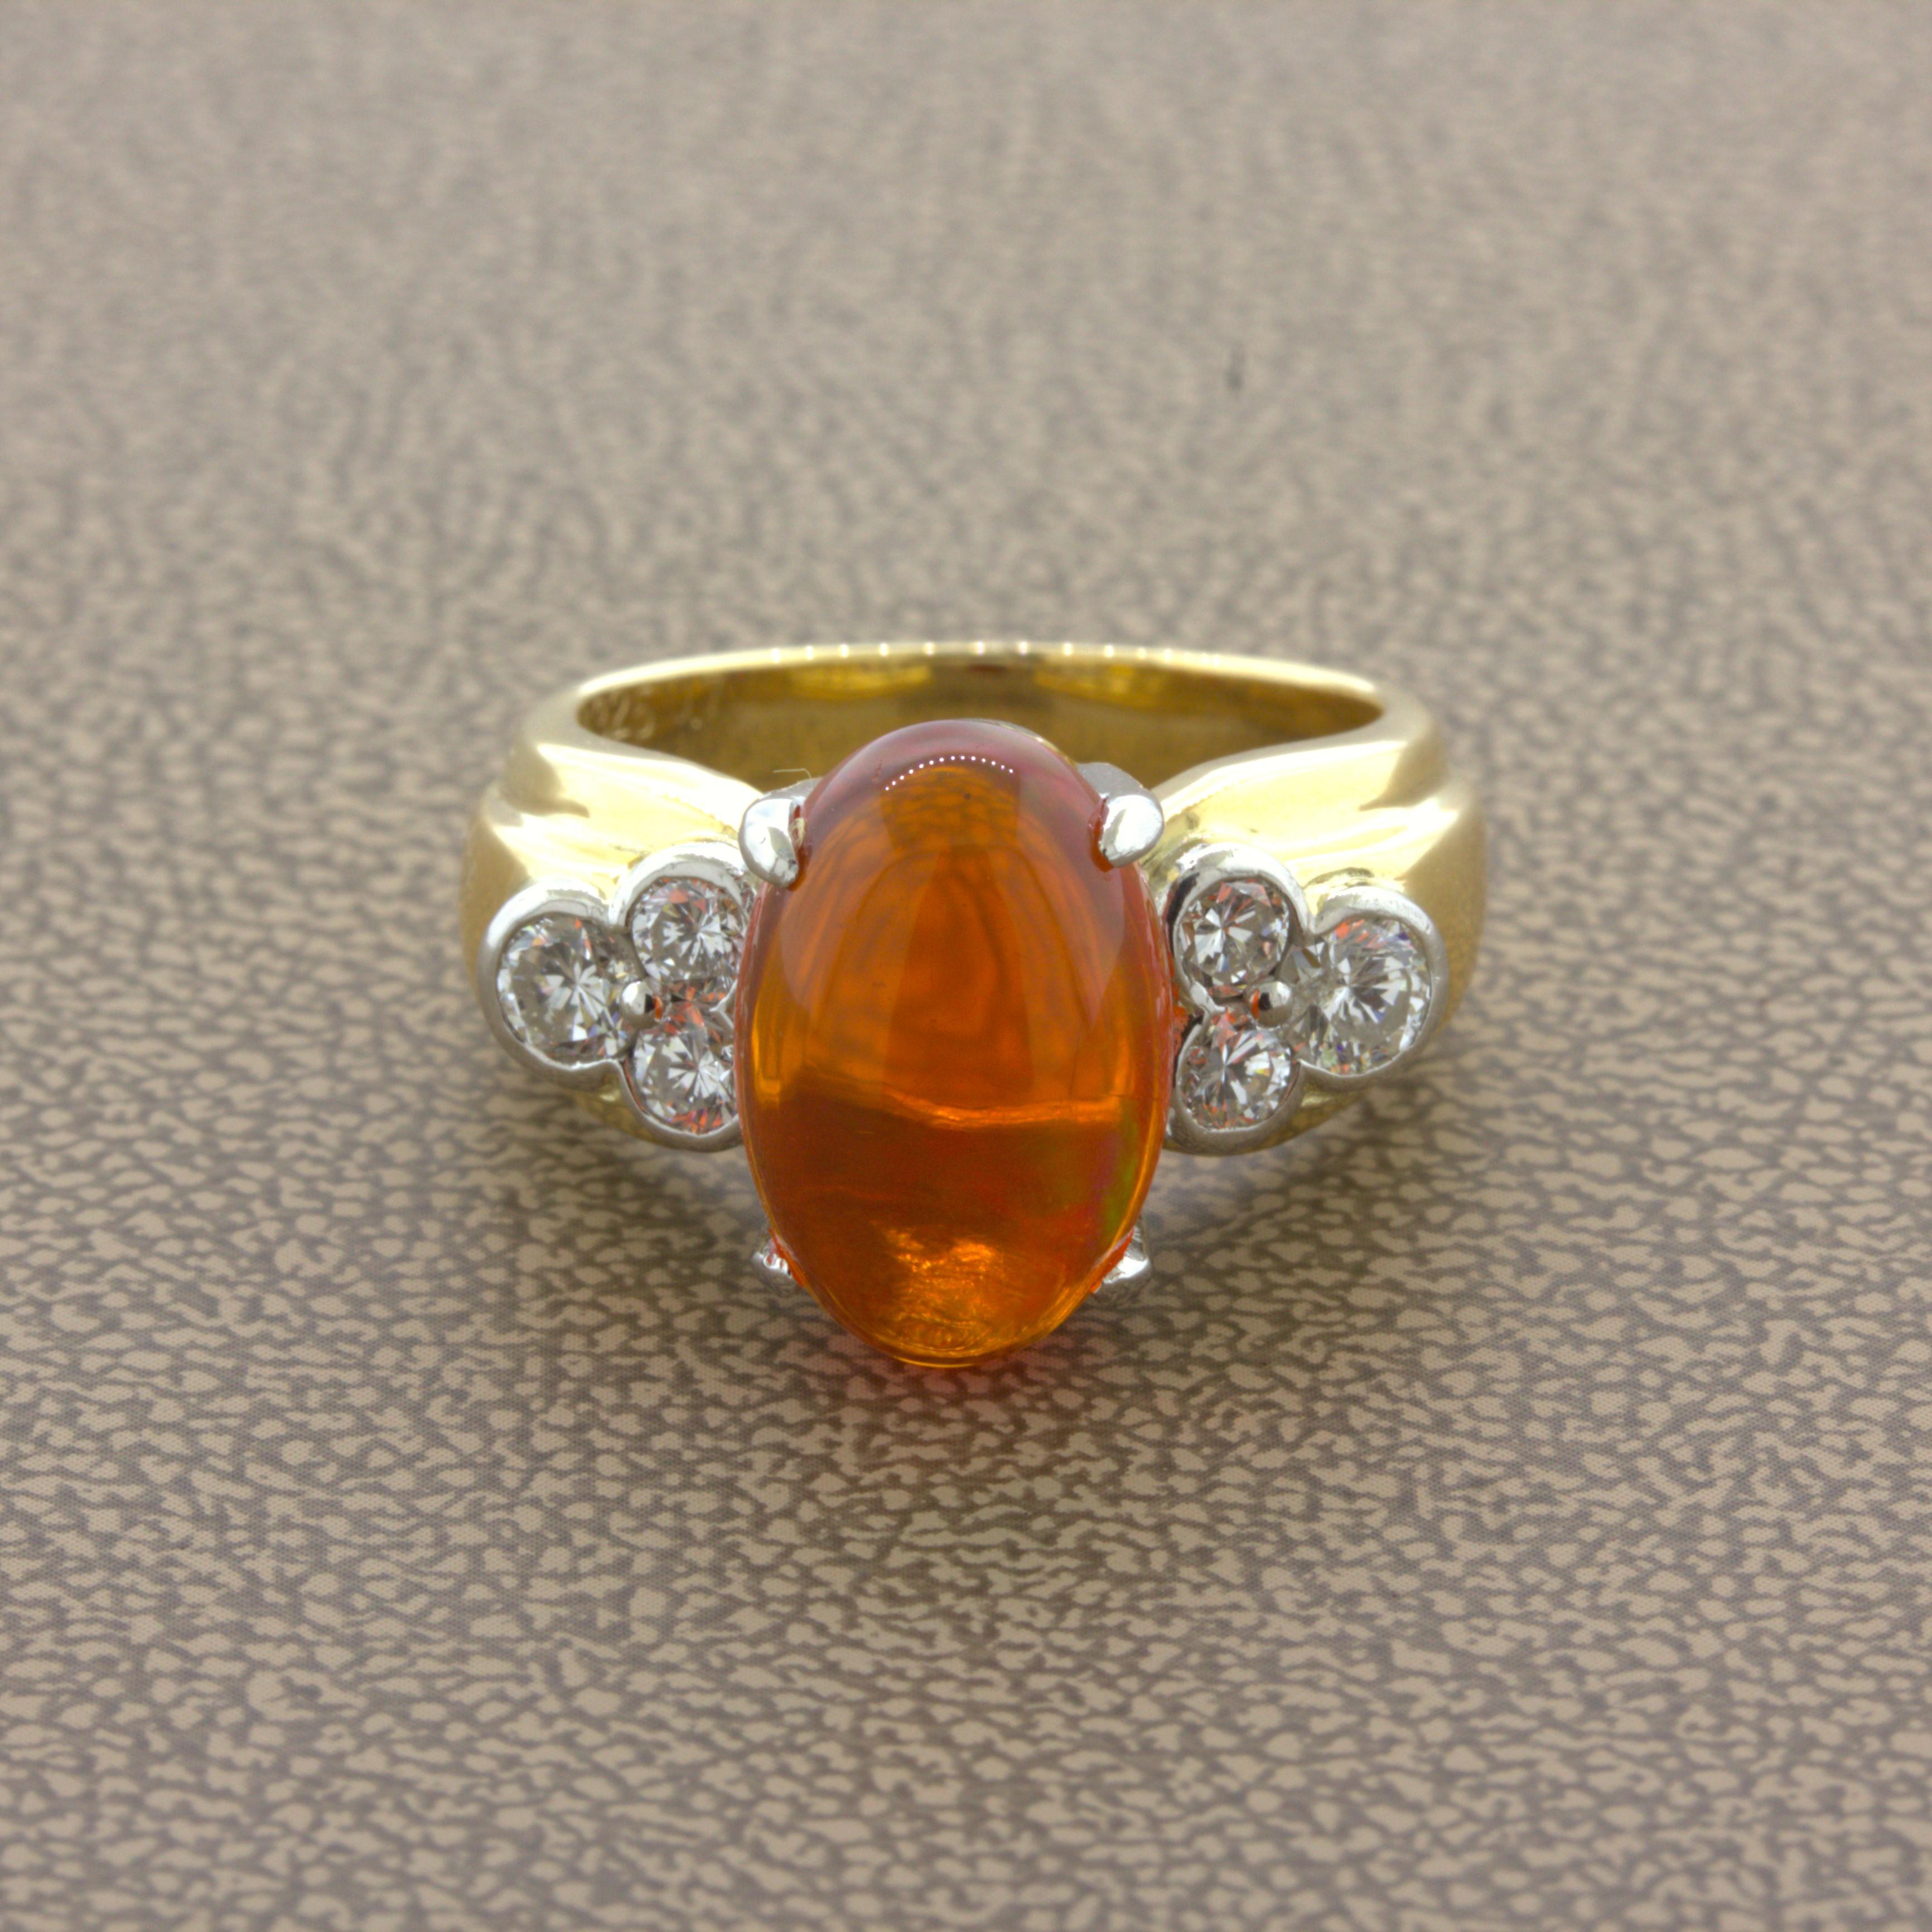 A superb gem fire opal takes center stage. It weighs 4.32 carats and has a super gemmy vivid orange-red color excellent play-of-color. Flashes or orange, yellow, green, and red can all be seen as you look at the opal at different angles. It is